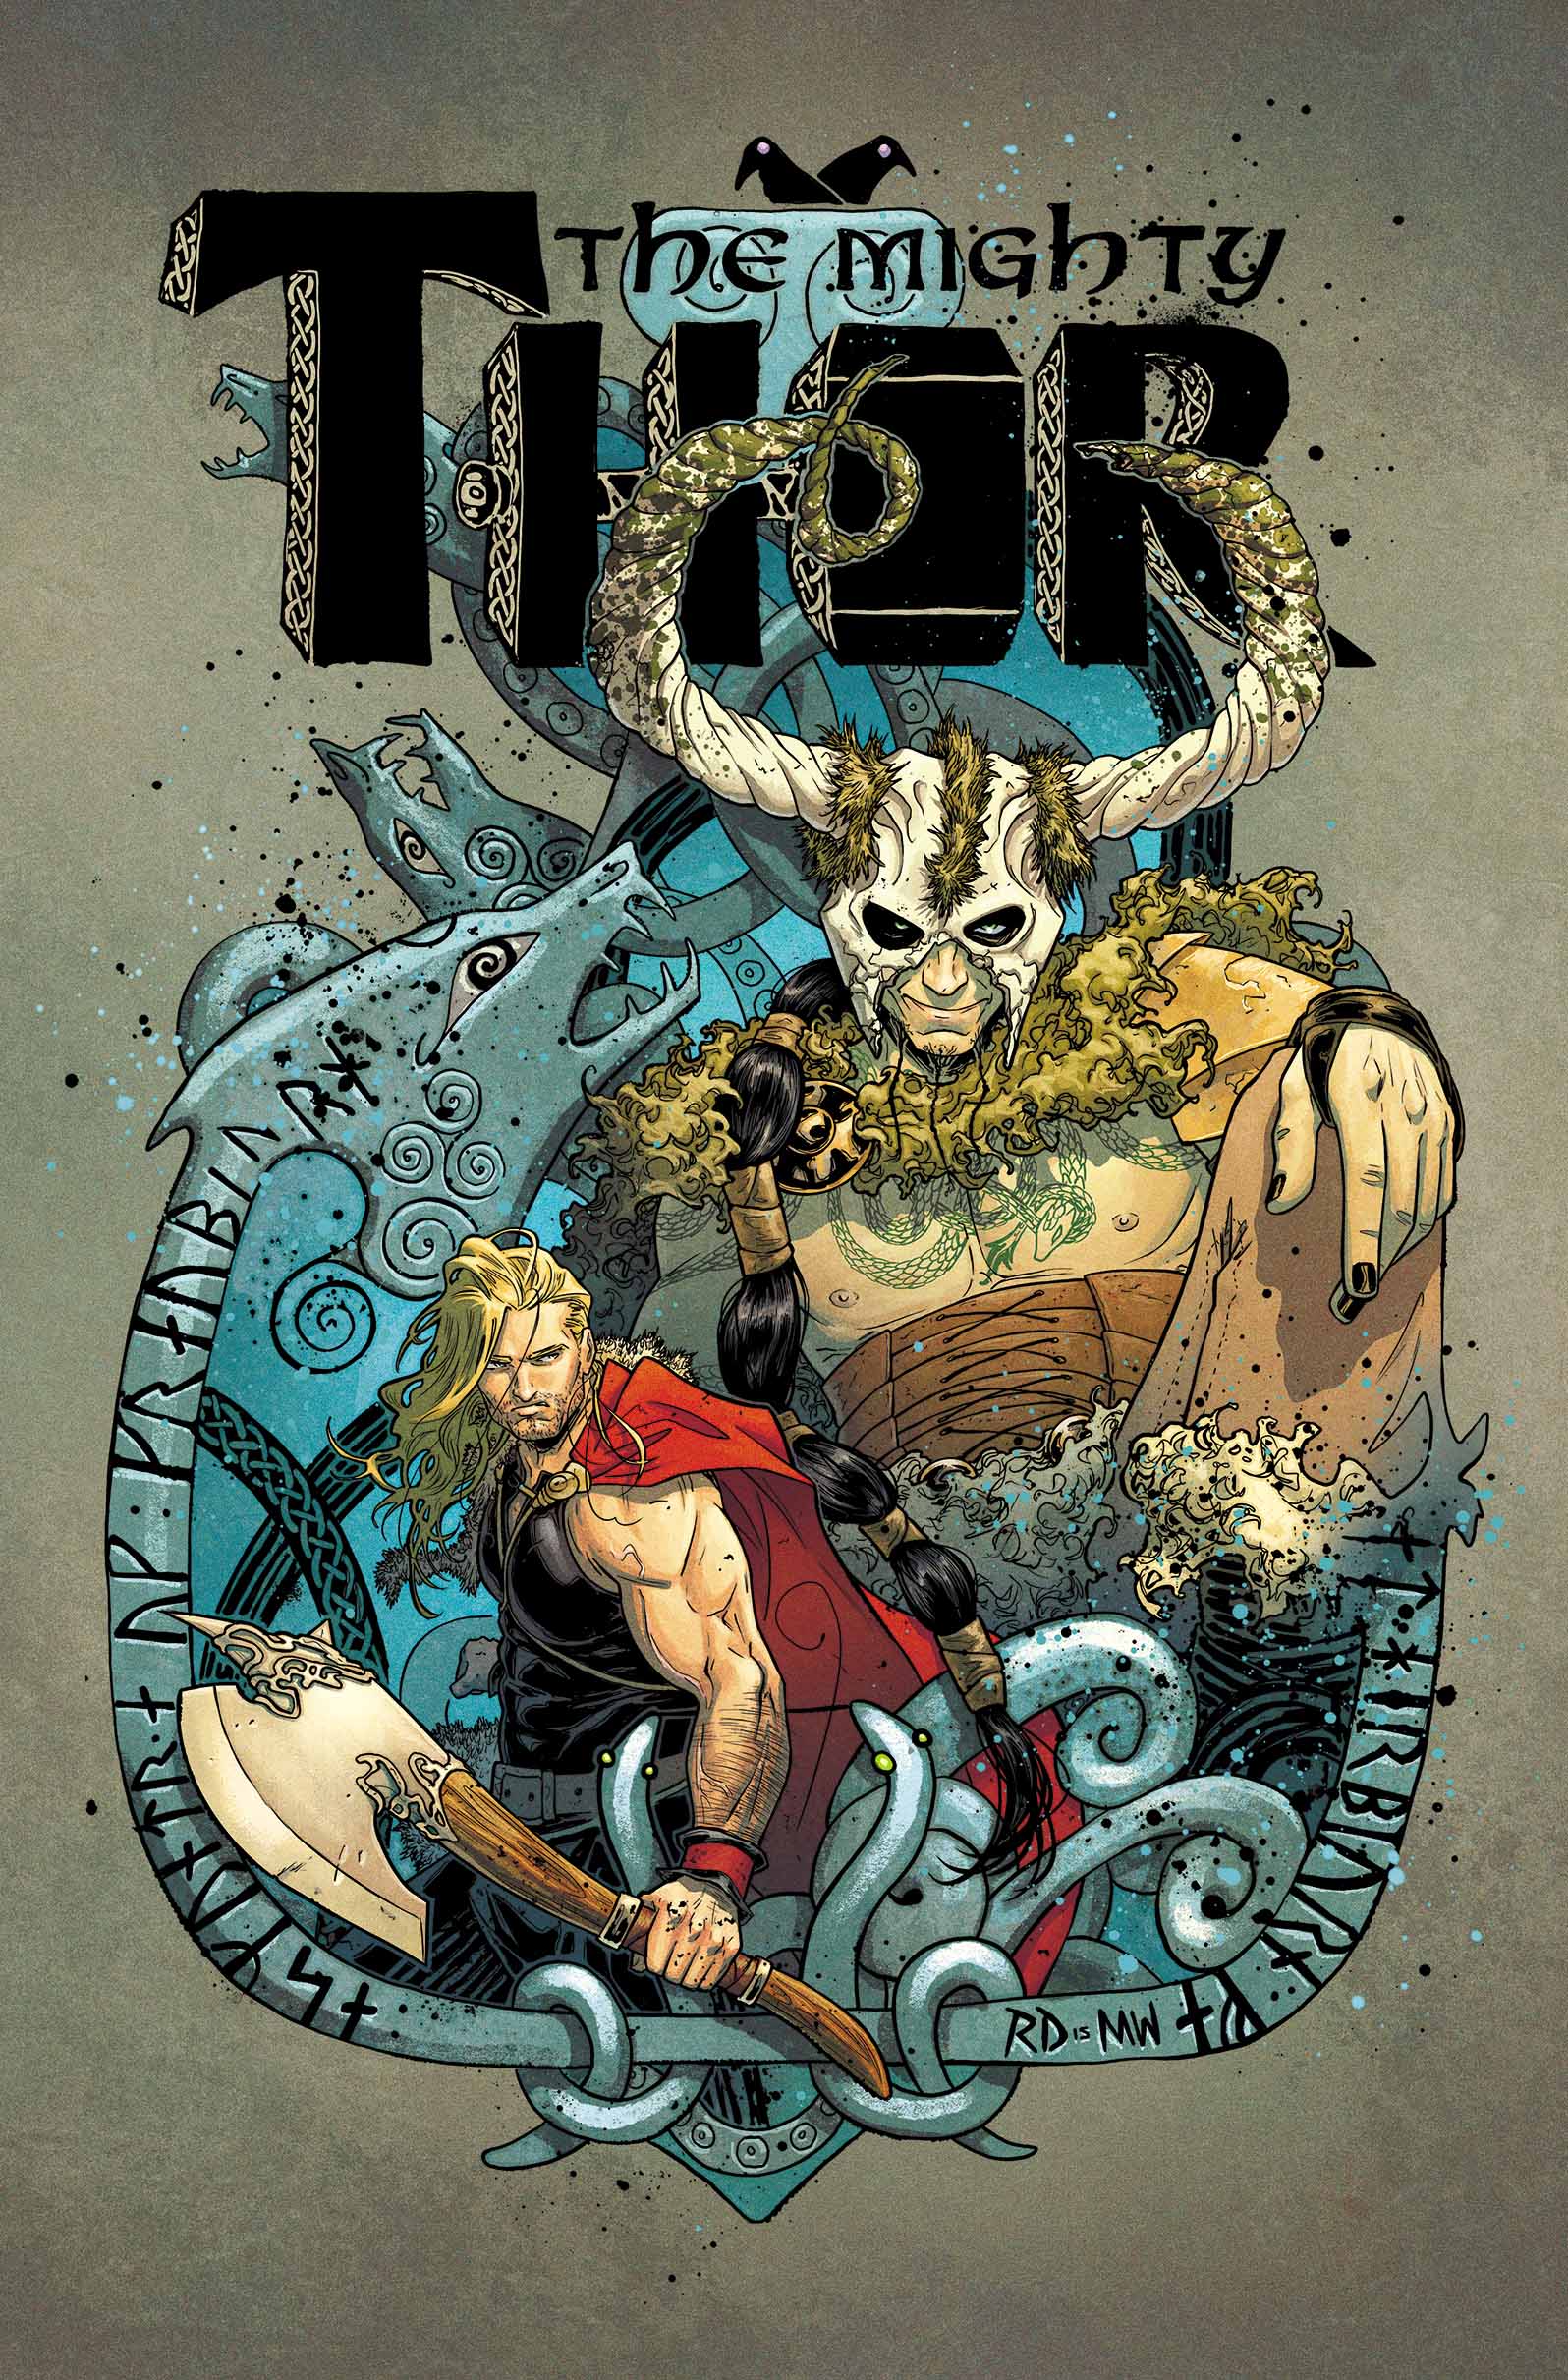 THE MIGHTY THOR #6